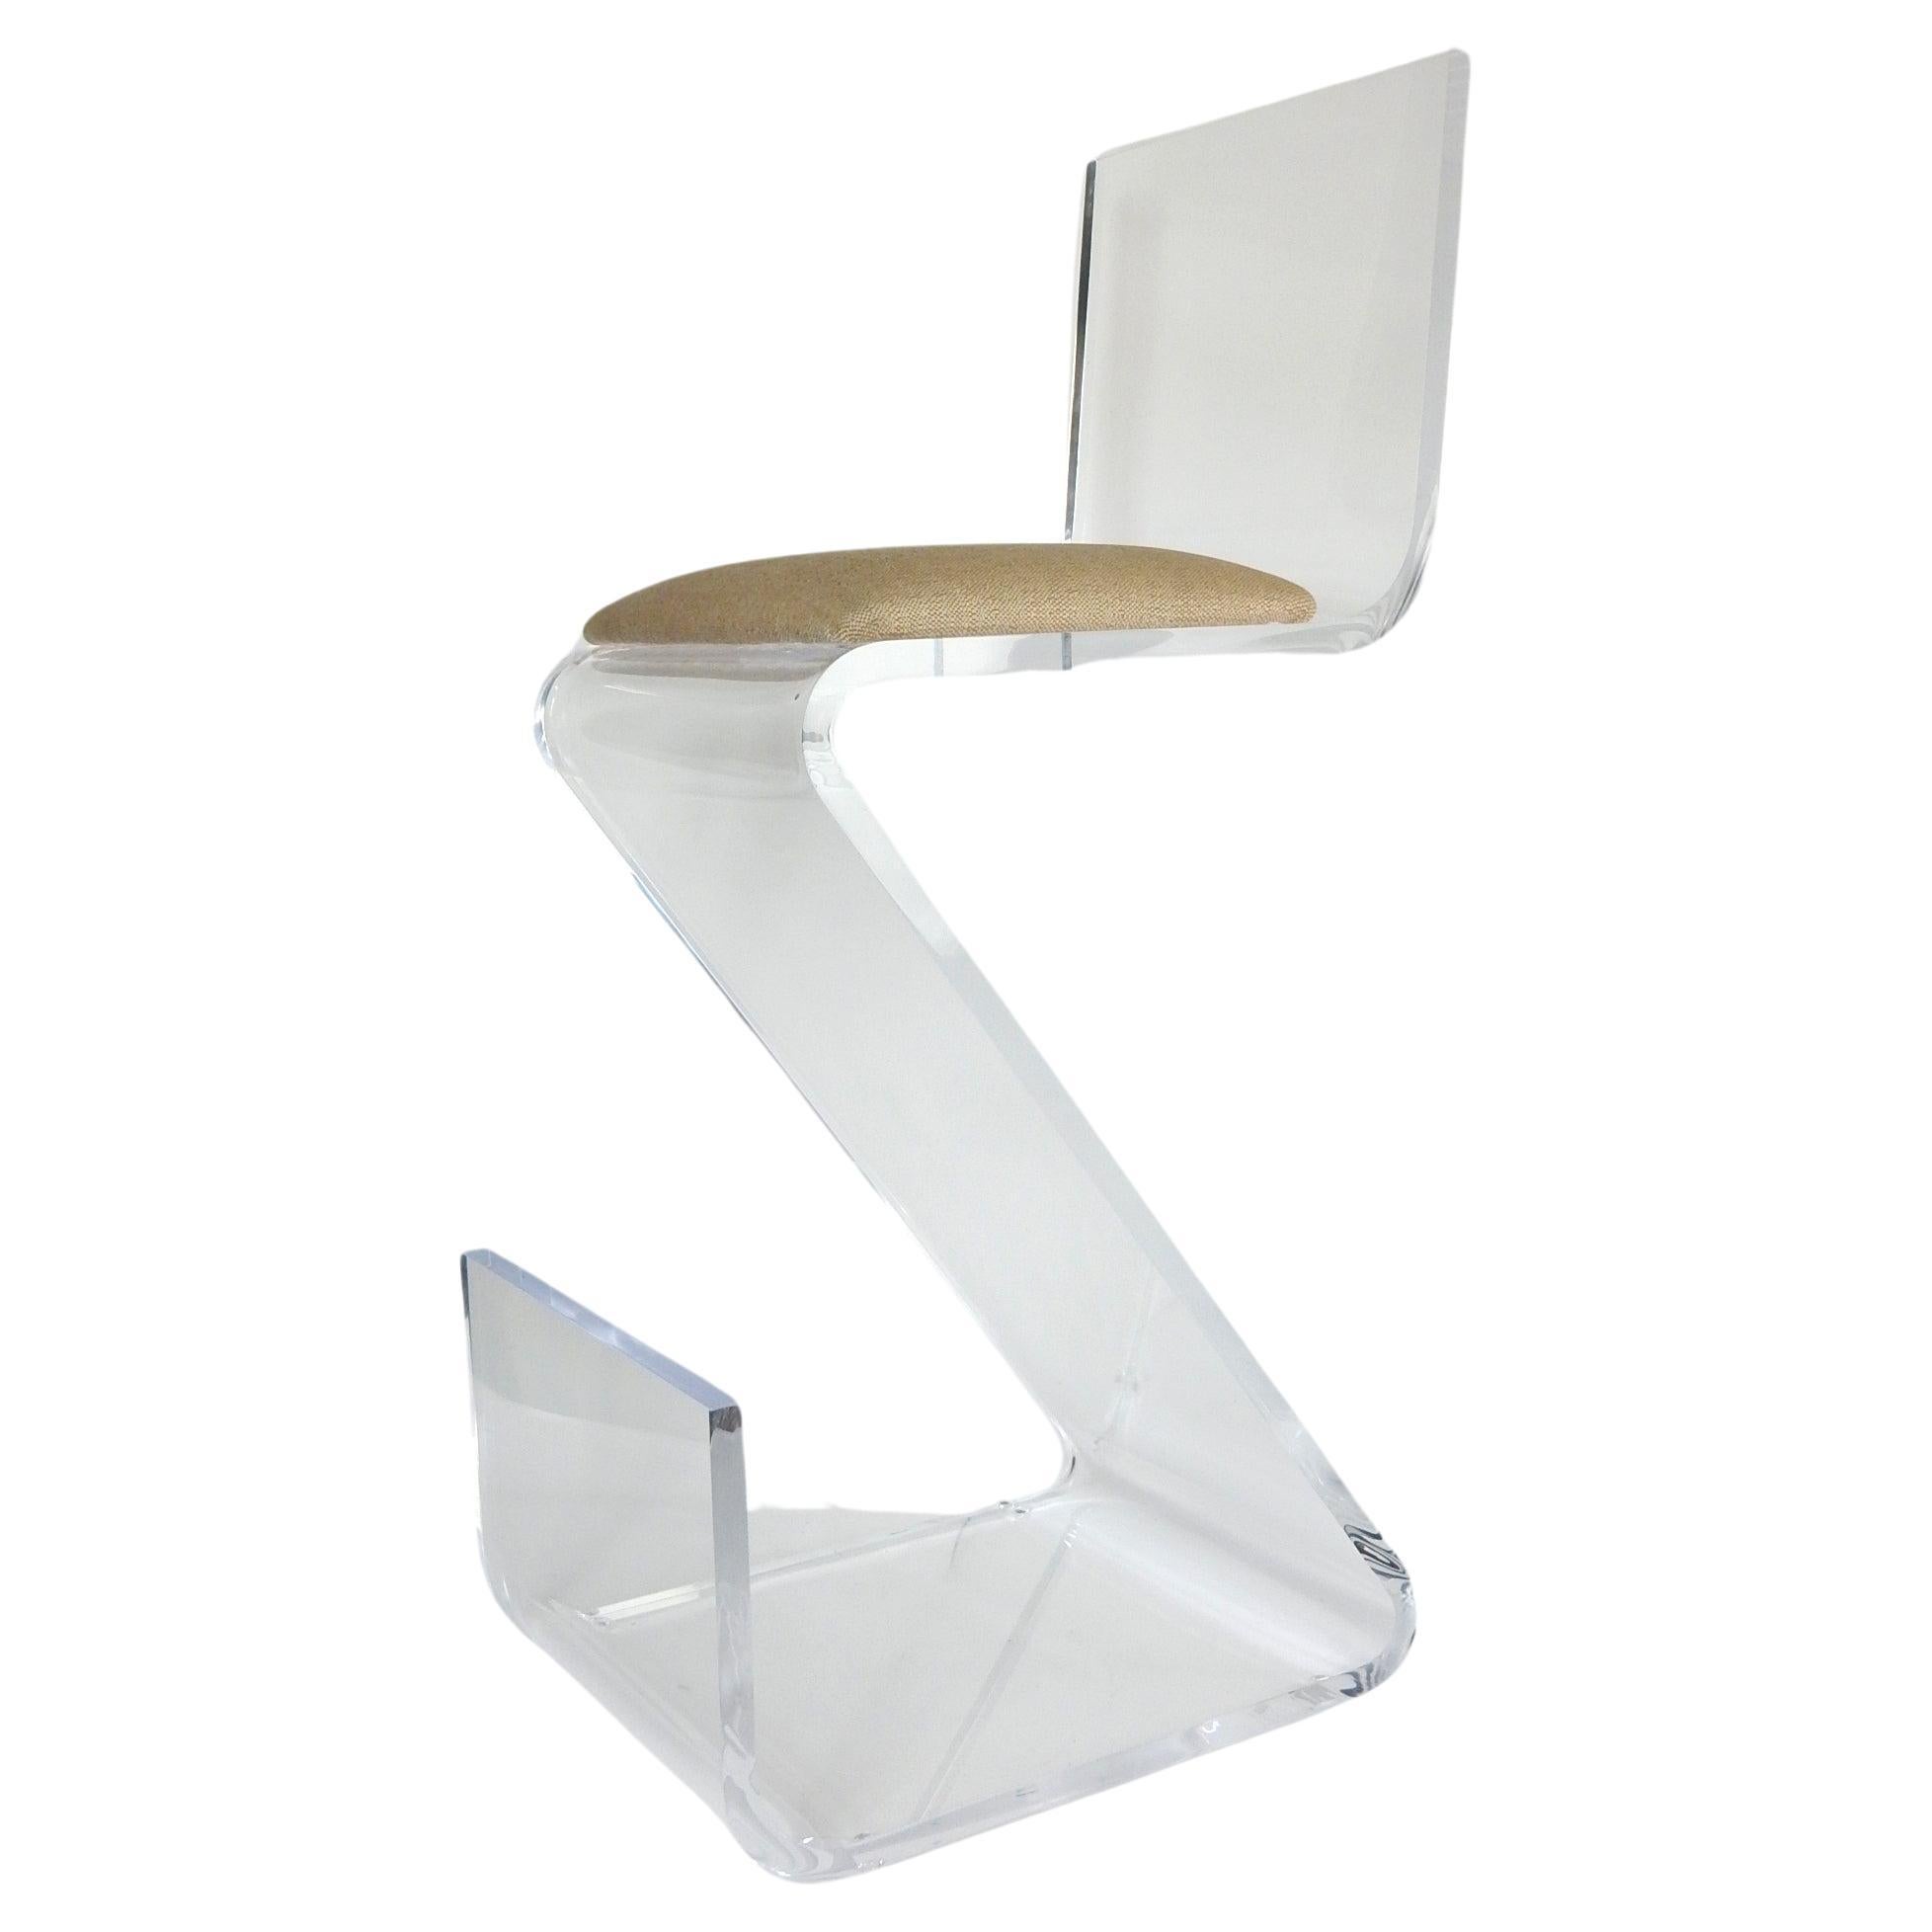 Sculpted 1 inch thick Lucite Z bar stool by Shlomi Haziza for H Studio(signed).
Each hand engraved-signed by Shlomi himself. Labeled on bottom of cushion.
8 available, priced per item.
Counter height. Padded seating area.
An EXTREMELY comfortable